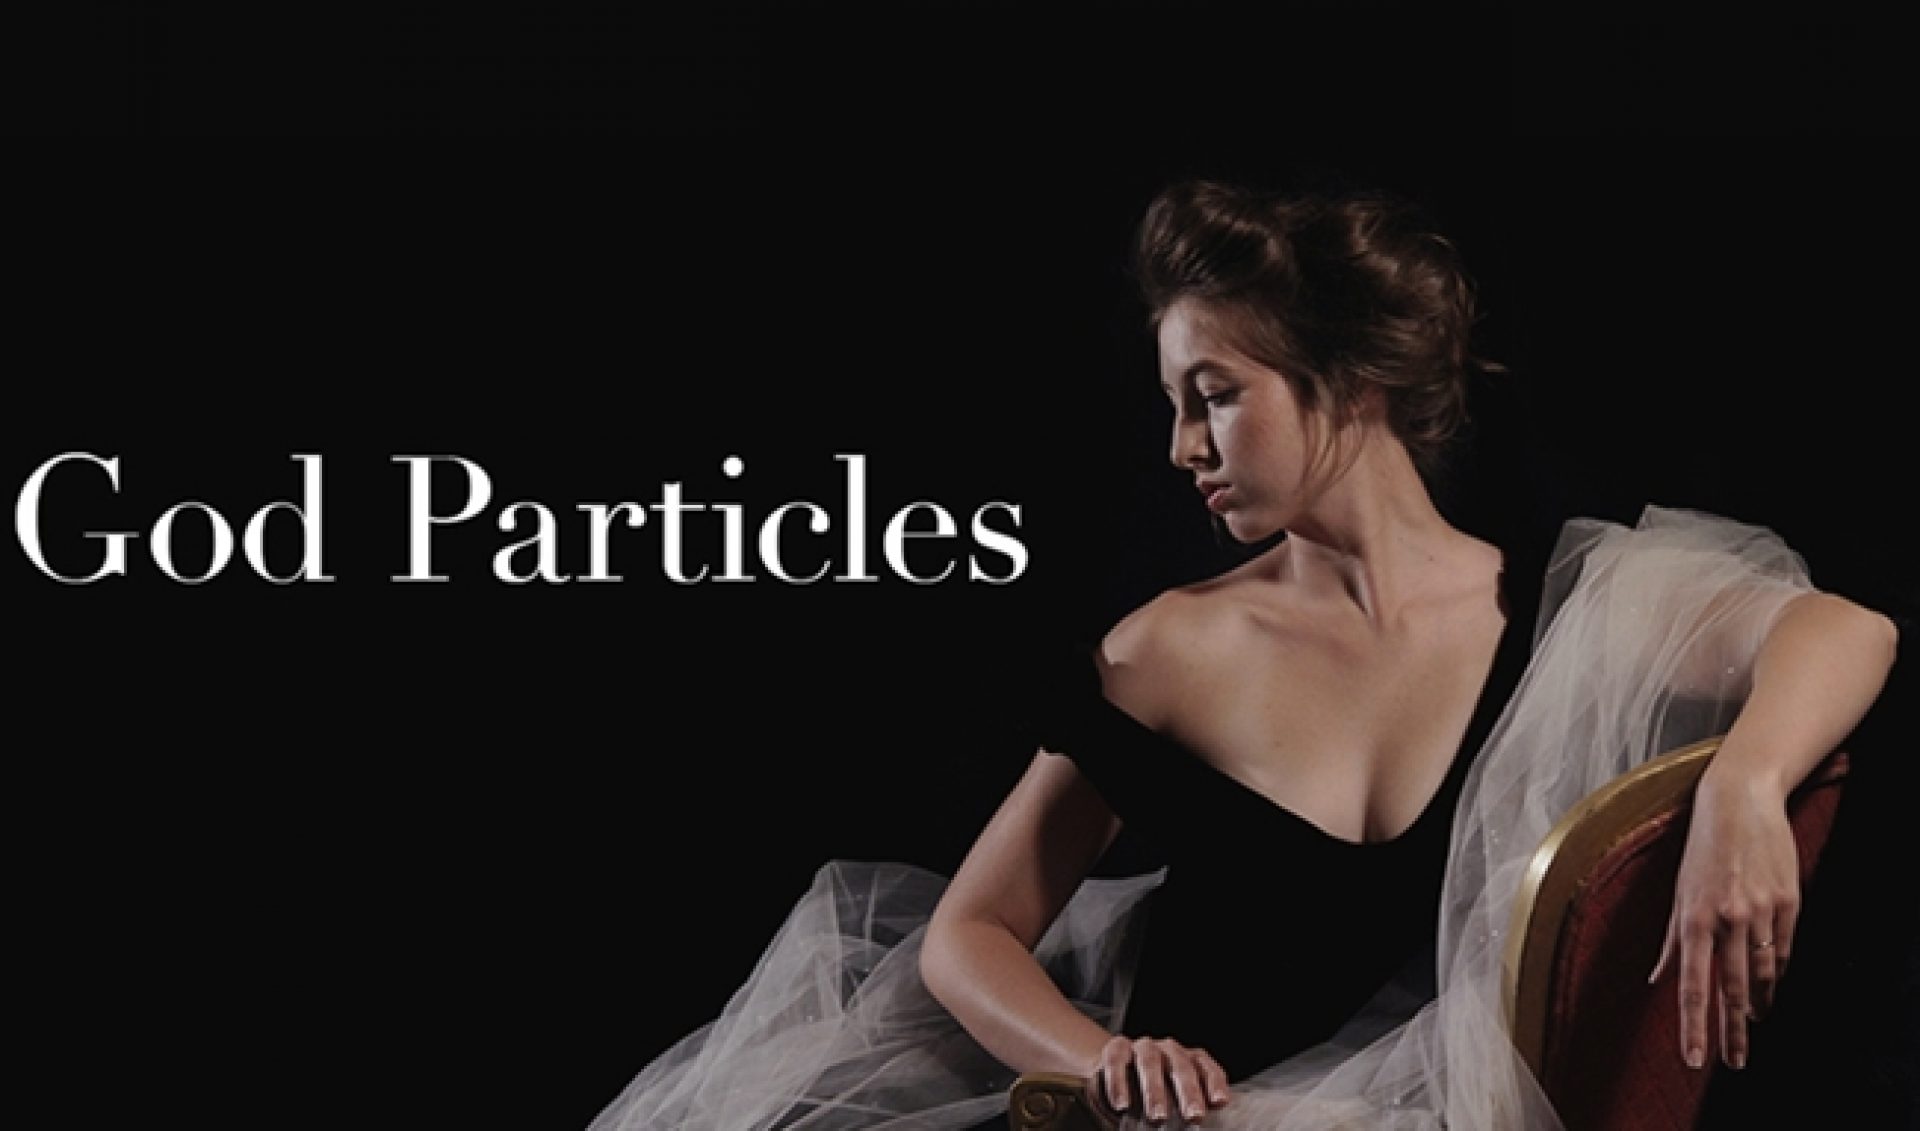 Indie Spotlight: In “God Particles”, Doomsday Sets The Tone